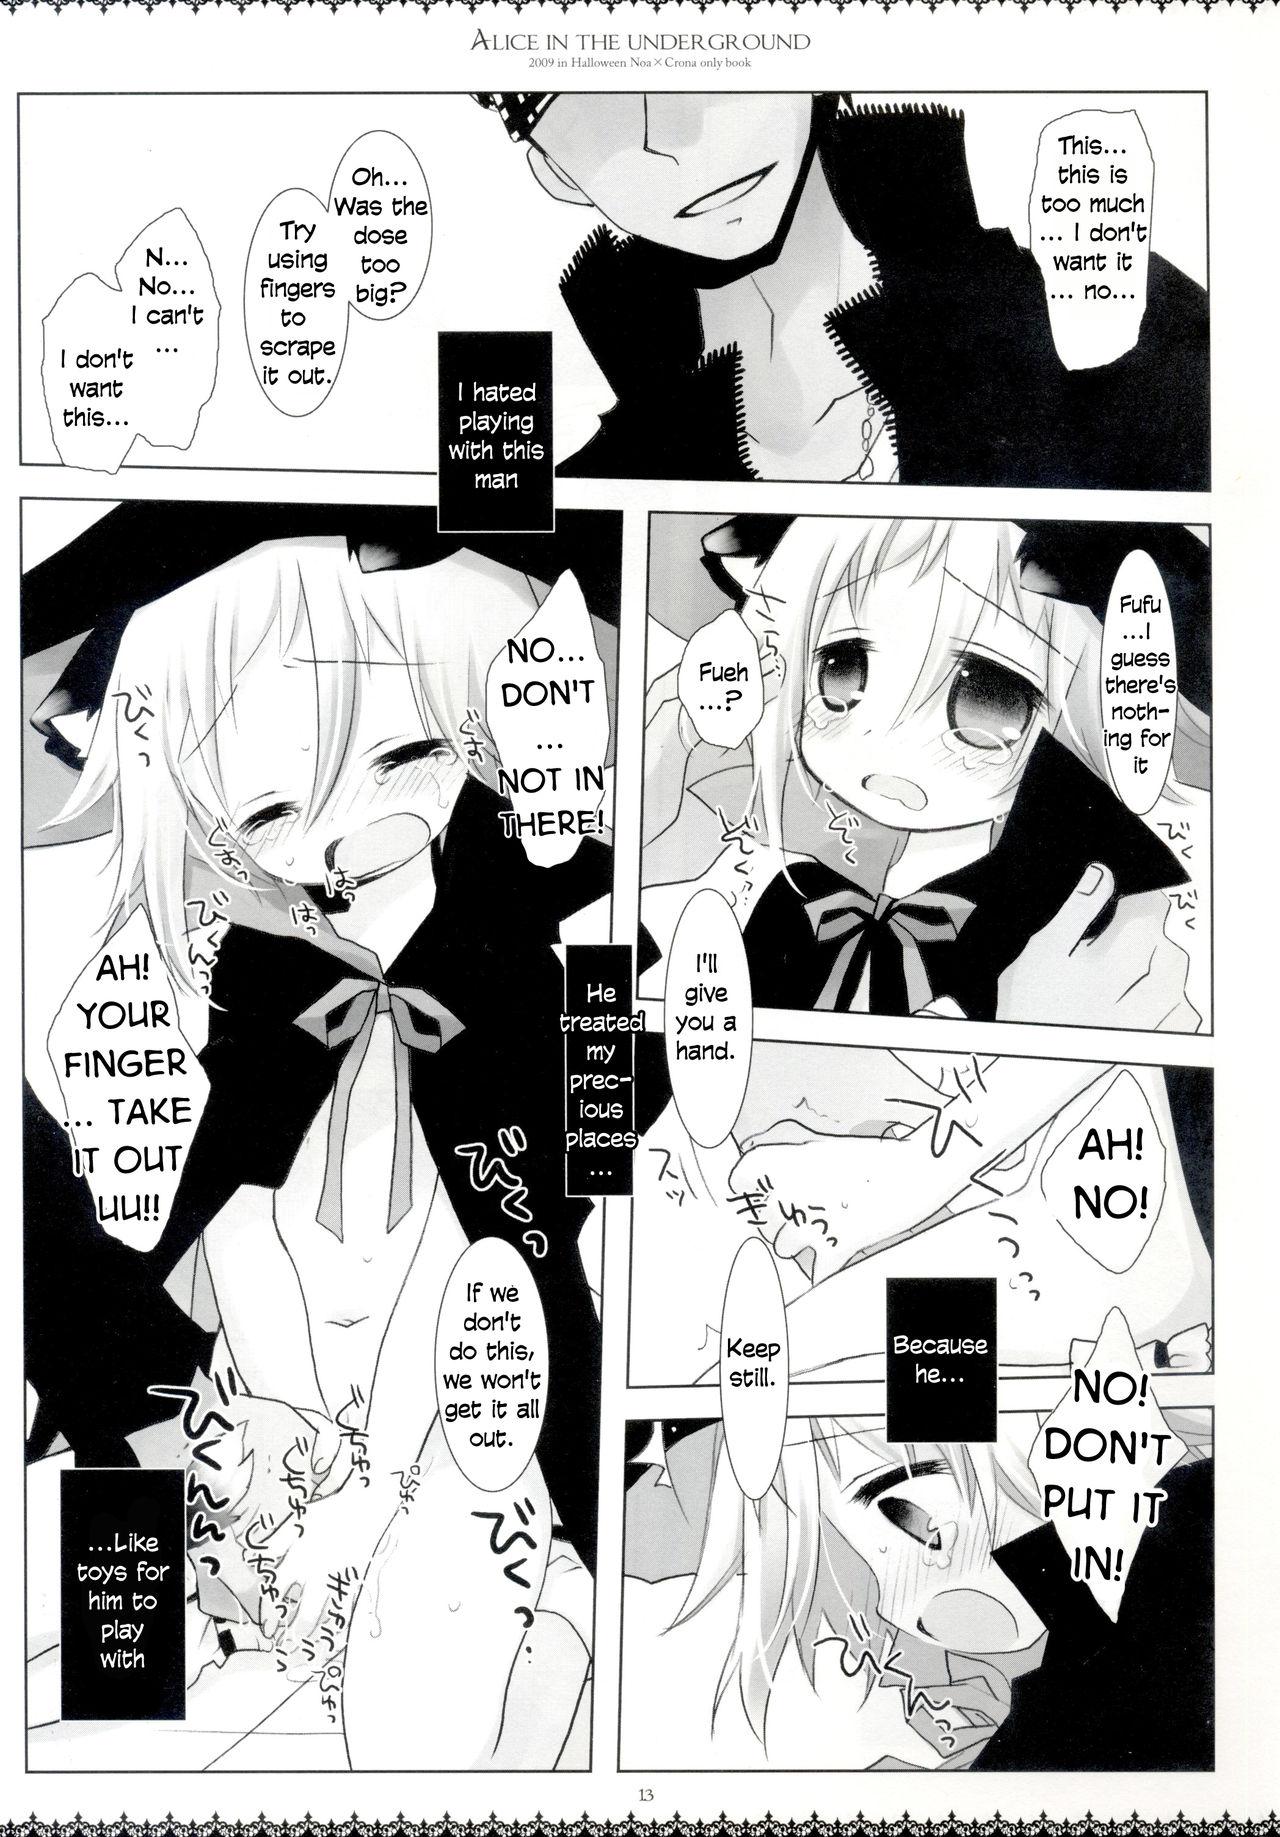 Abuse Alice in the underground - Soul eater Couples Fucking - Page 12